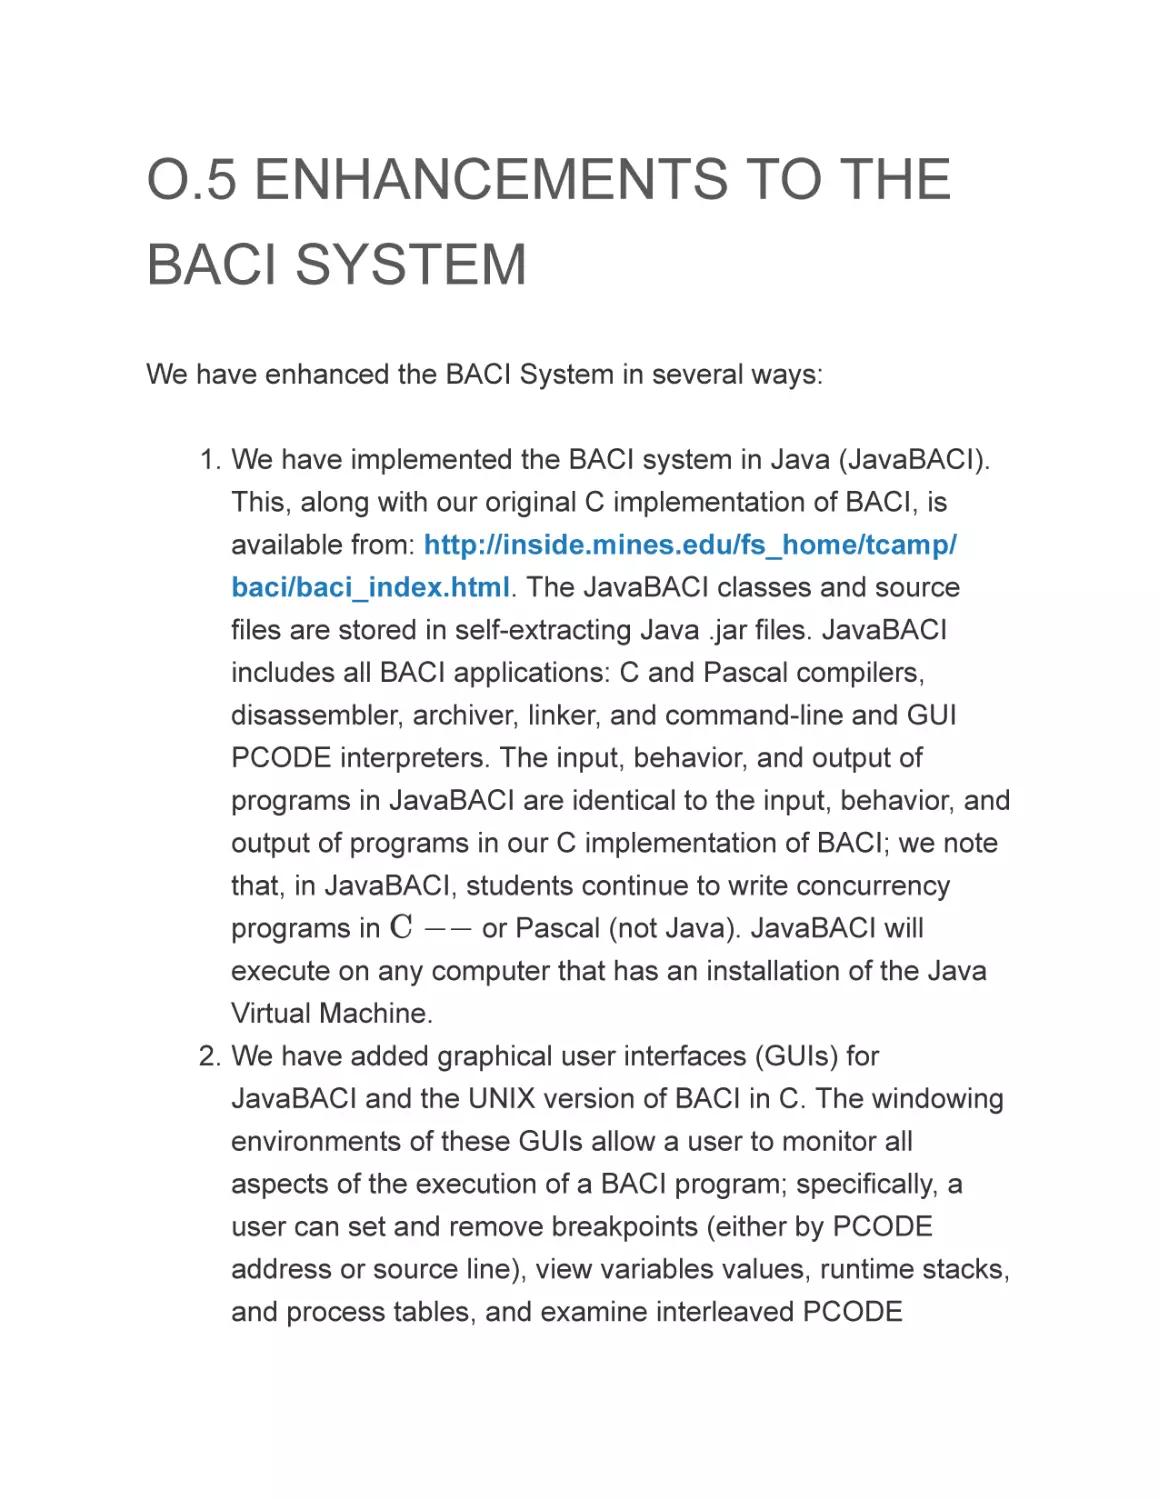 O.5 ENHANCEMENTS TO THE BACI SYSTEM